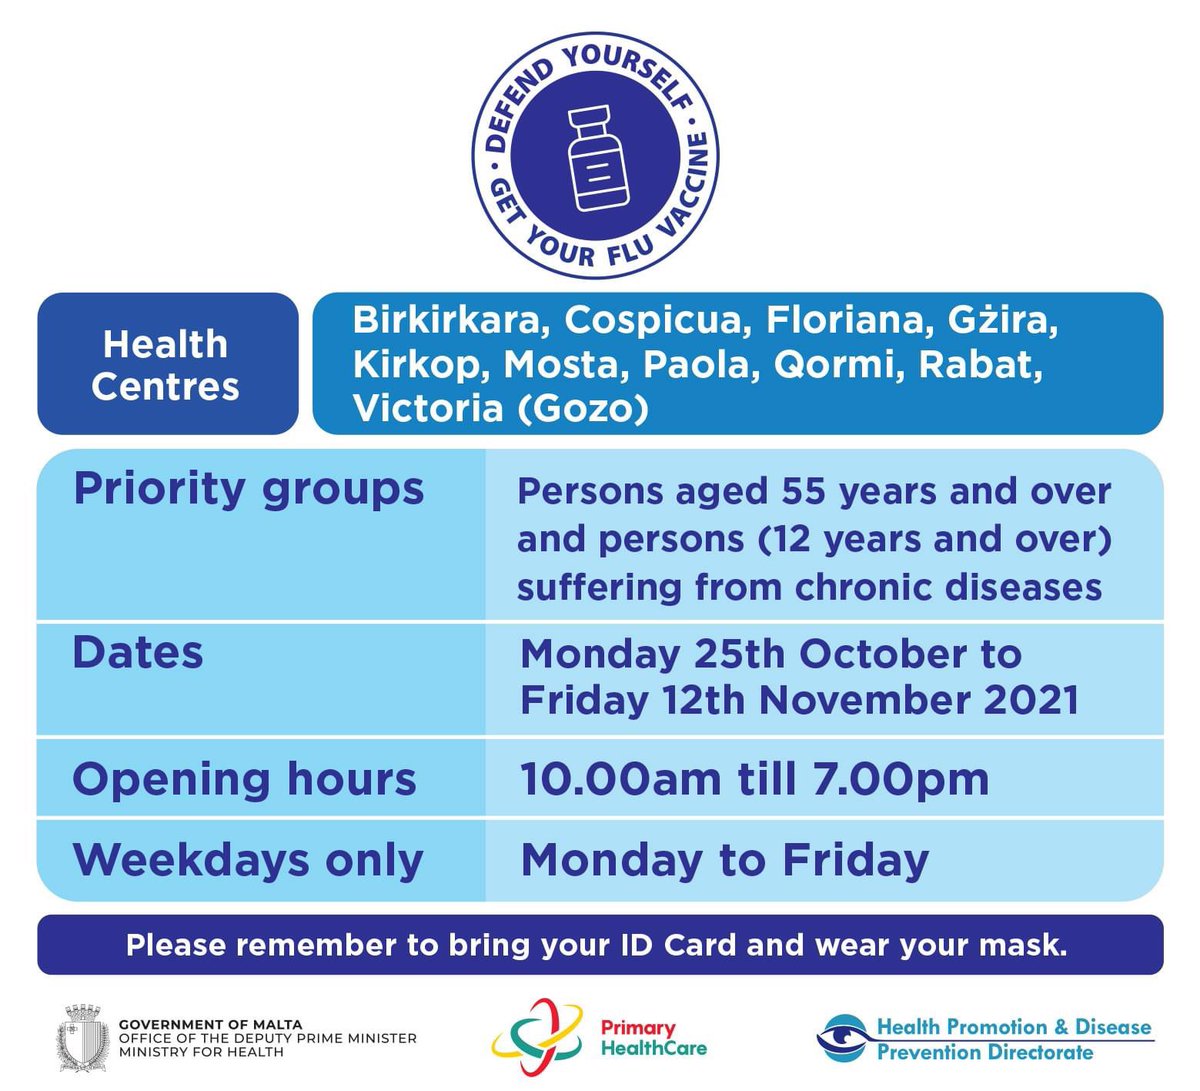 📌  The influenza vaccine will be available as from today from all Health Centres between 10am - 7pm to:    ➡️persons aged 55 years and over,  ➡️persons suffering from chronic illness             #defendyourself #getyourfluvaccine